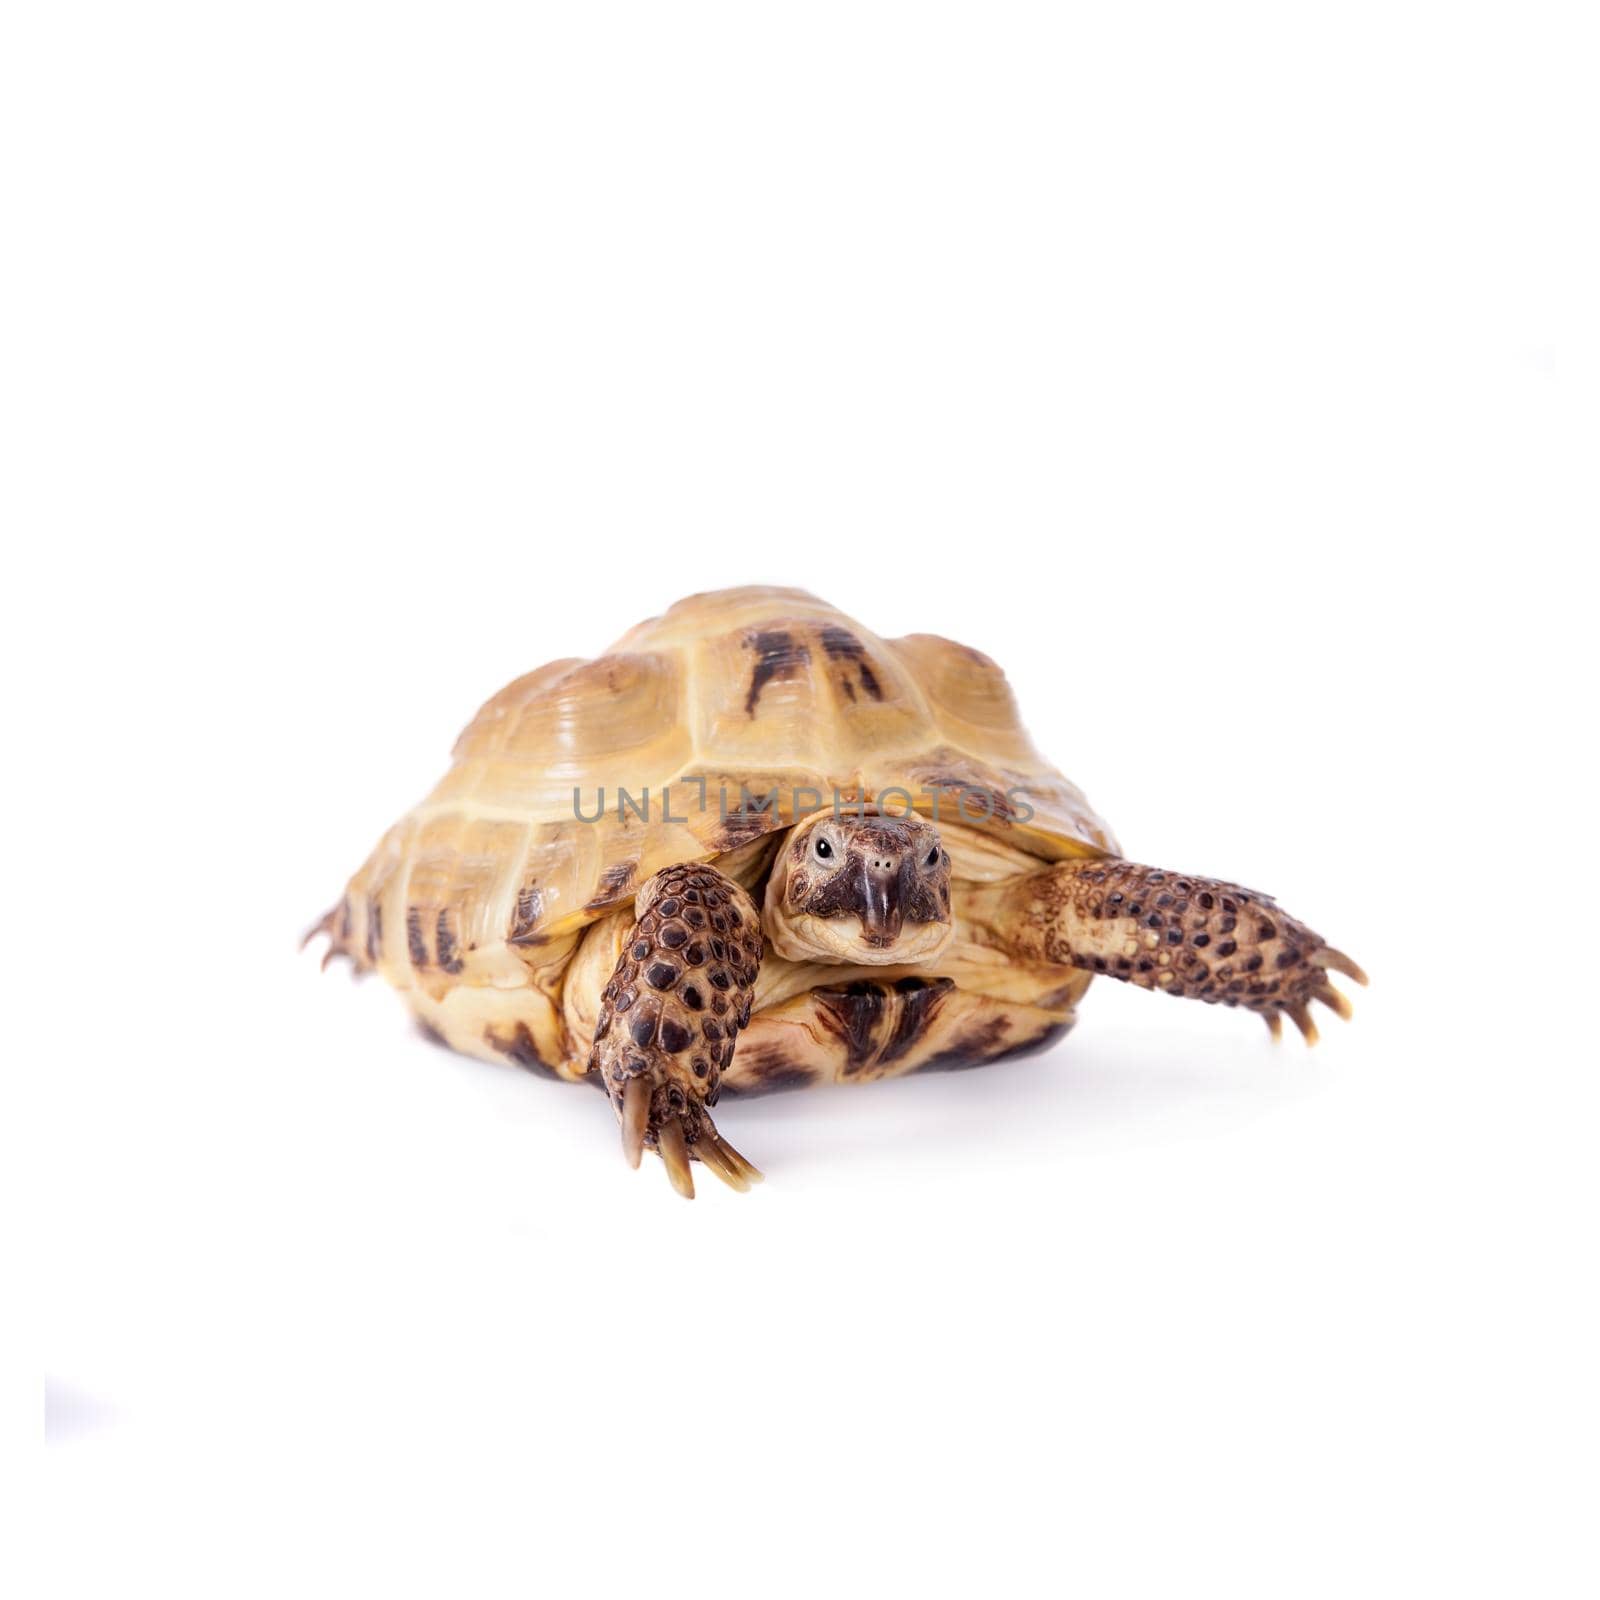 Russian or Central Asian tortoise, Agrionemys horsfieldii